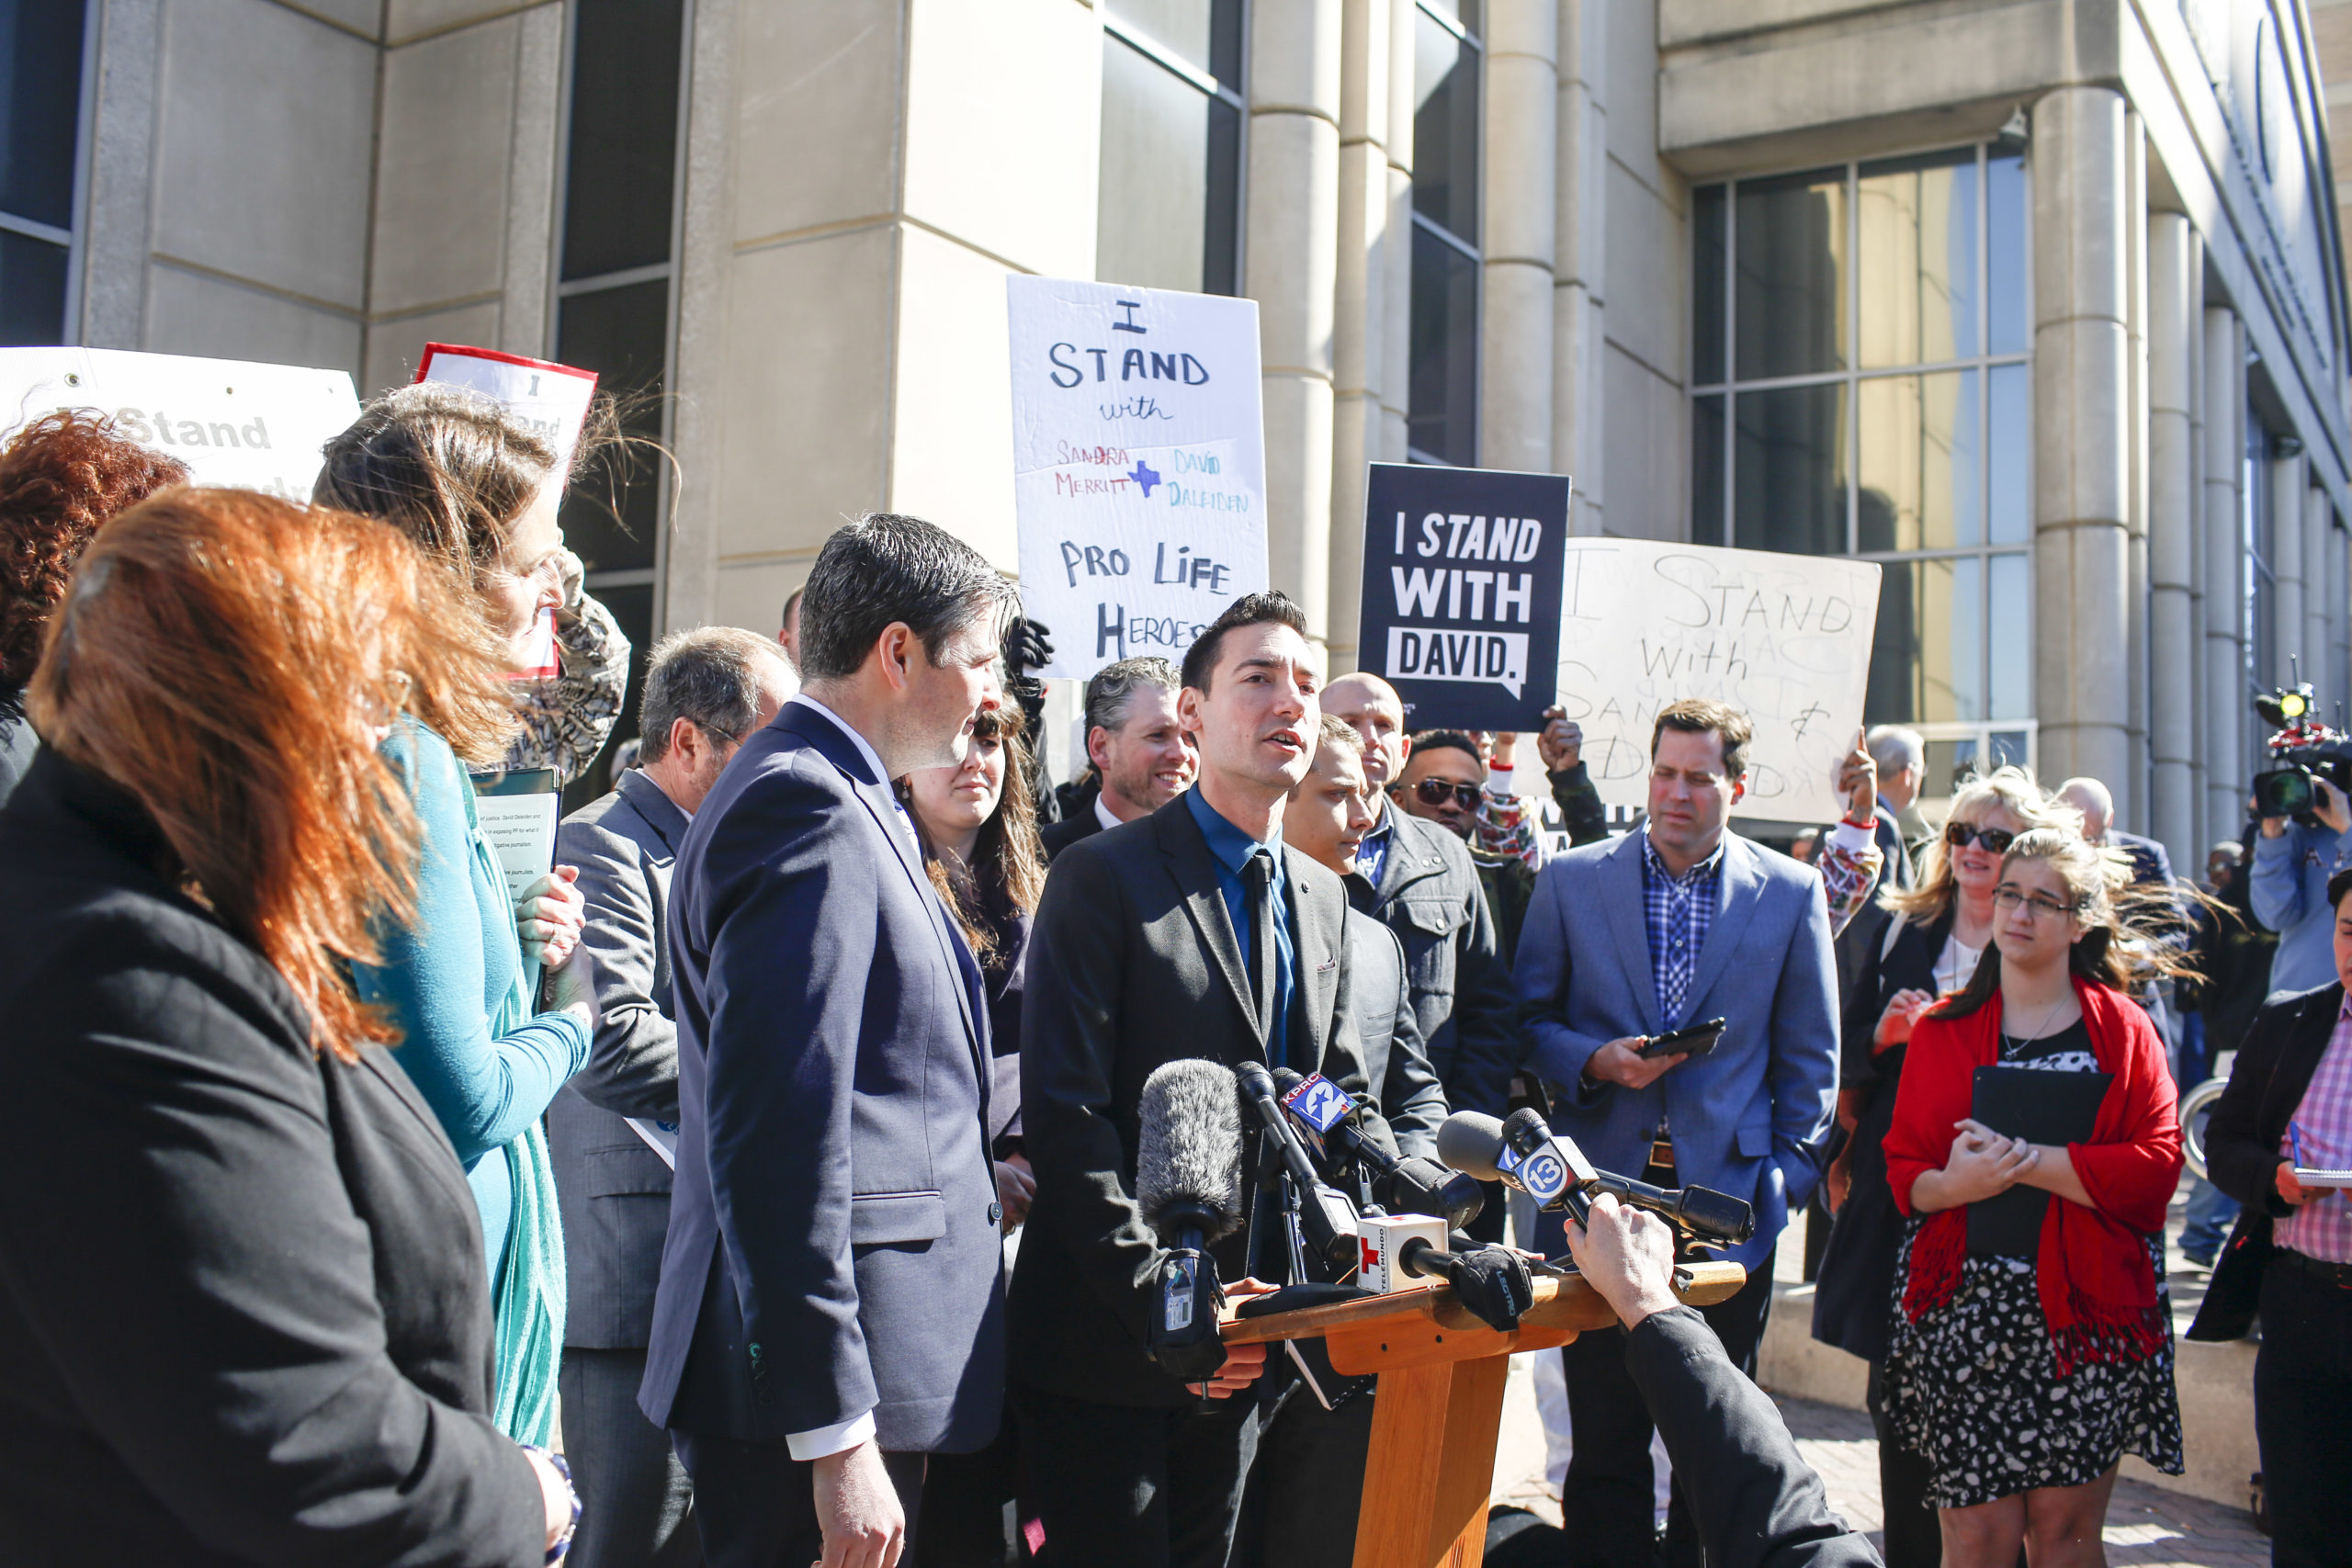 HOUSTON, TX - FEBRUARY 04: David Daleiden, a defendant in an indictment stemming from a Planned Parenthood video he helped produce, speaks to the media after appearing in court at the Harris County Courthouse on February 4, 2016 in Houston, Texas. (Photo by Eric Kayne/Getty Images)